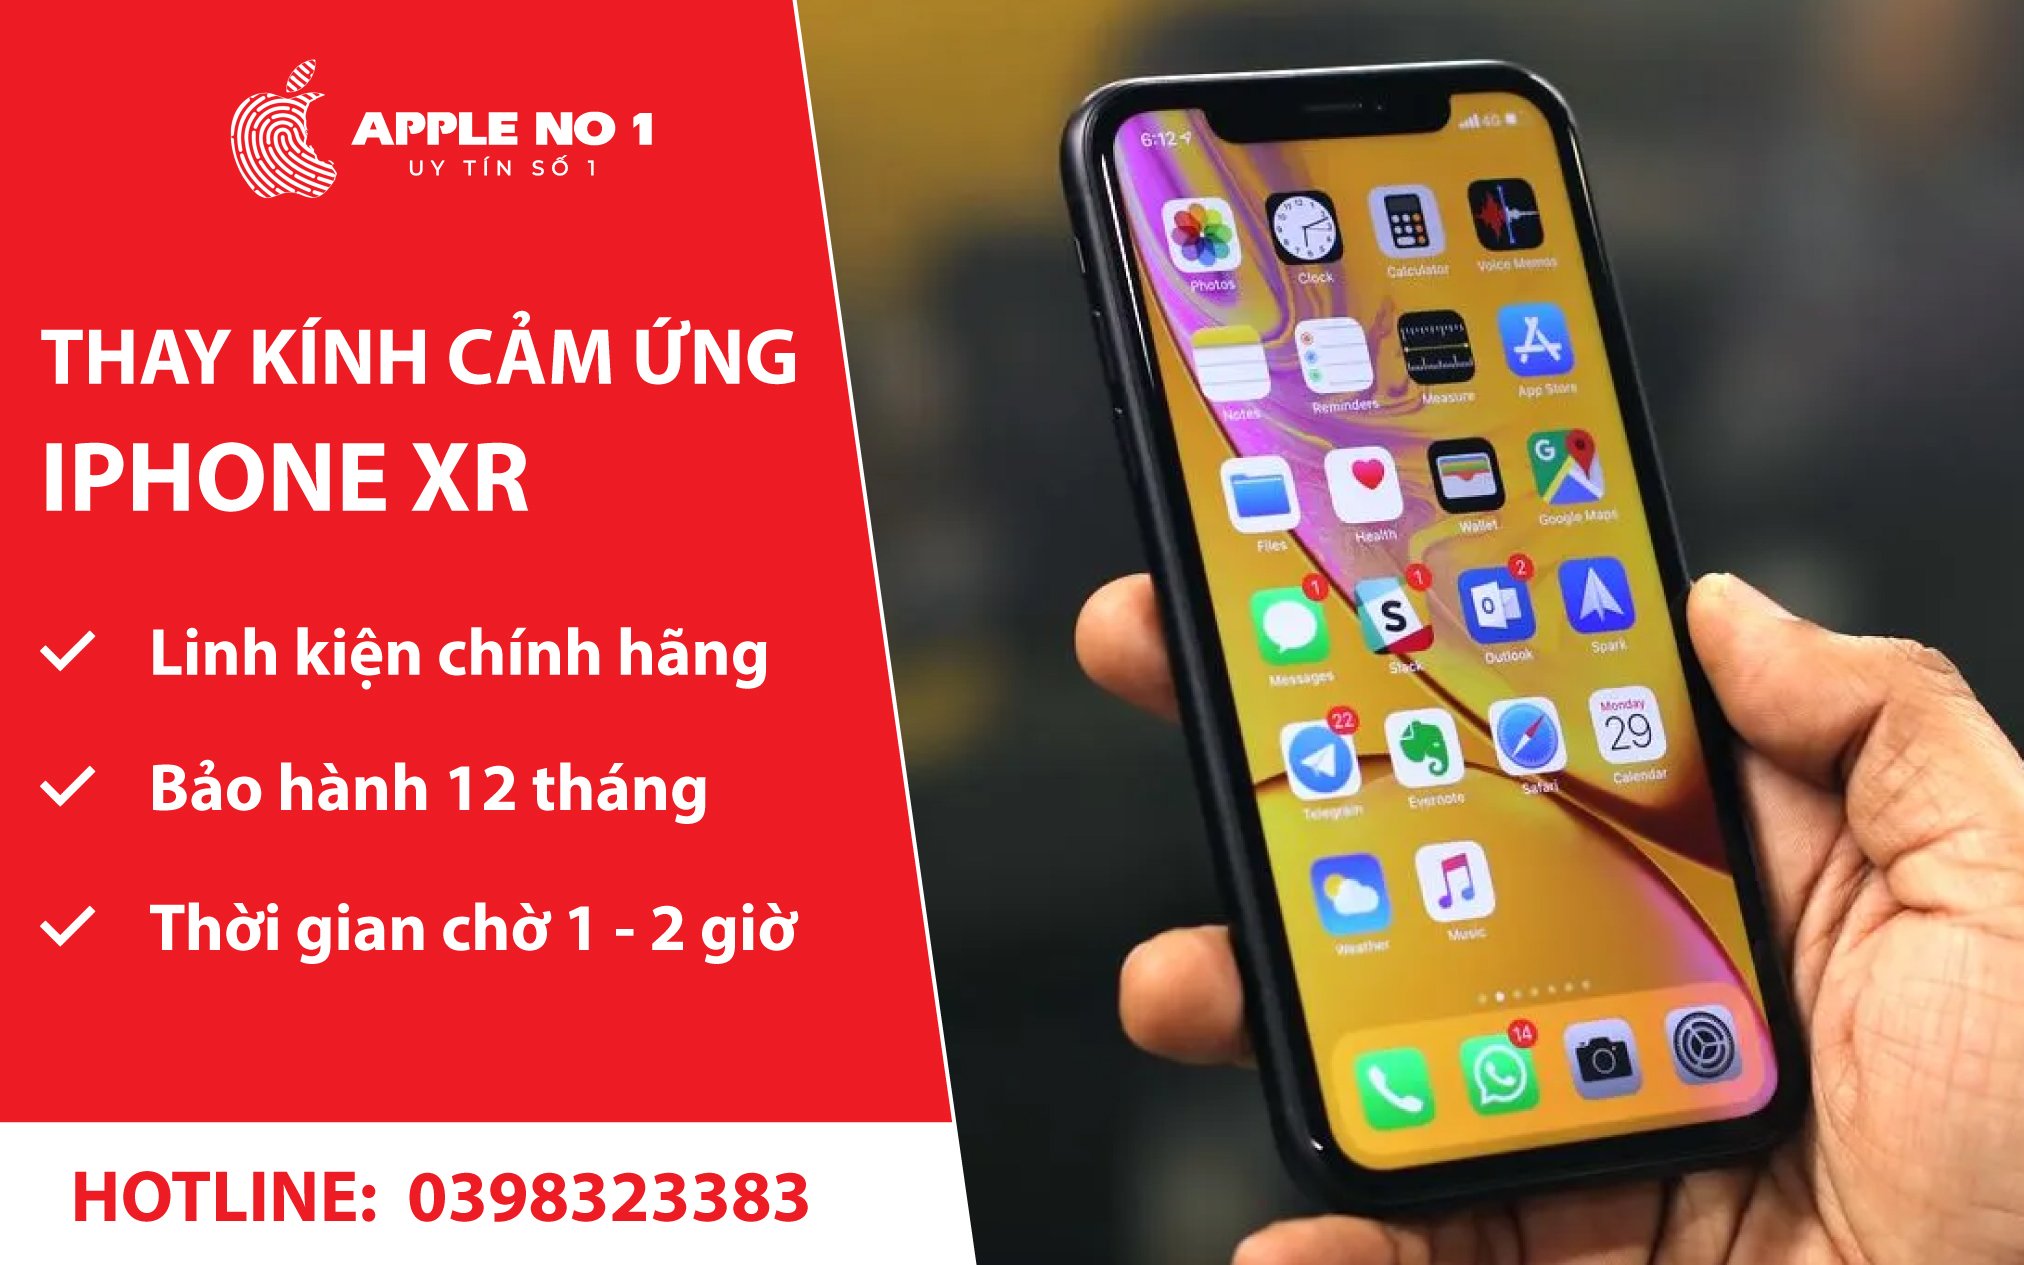 thay kinh cam ung iphone xr gia re, lay ngay tai Ha Noi